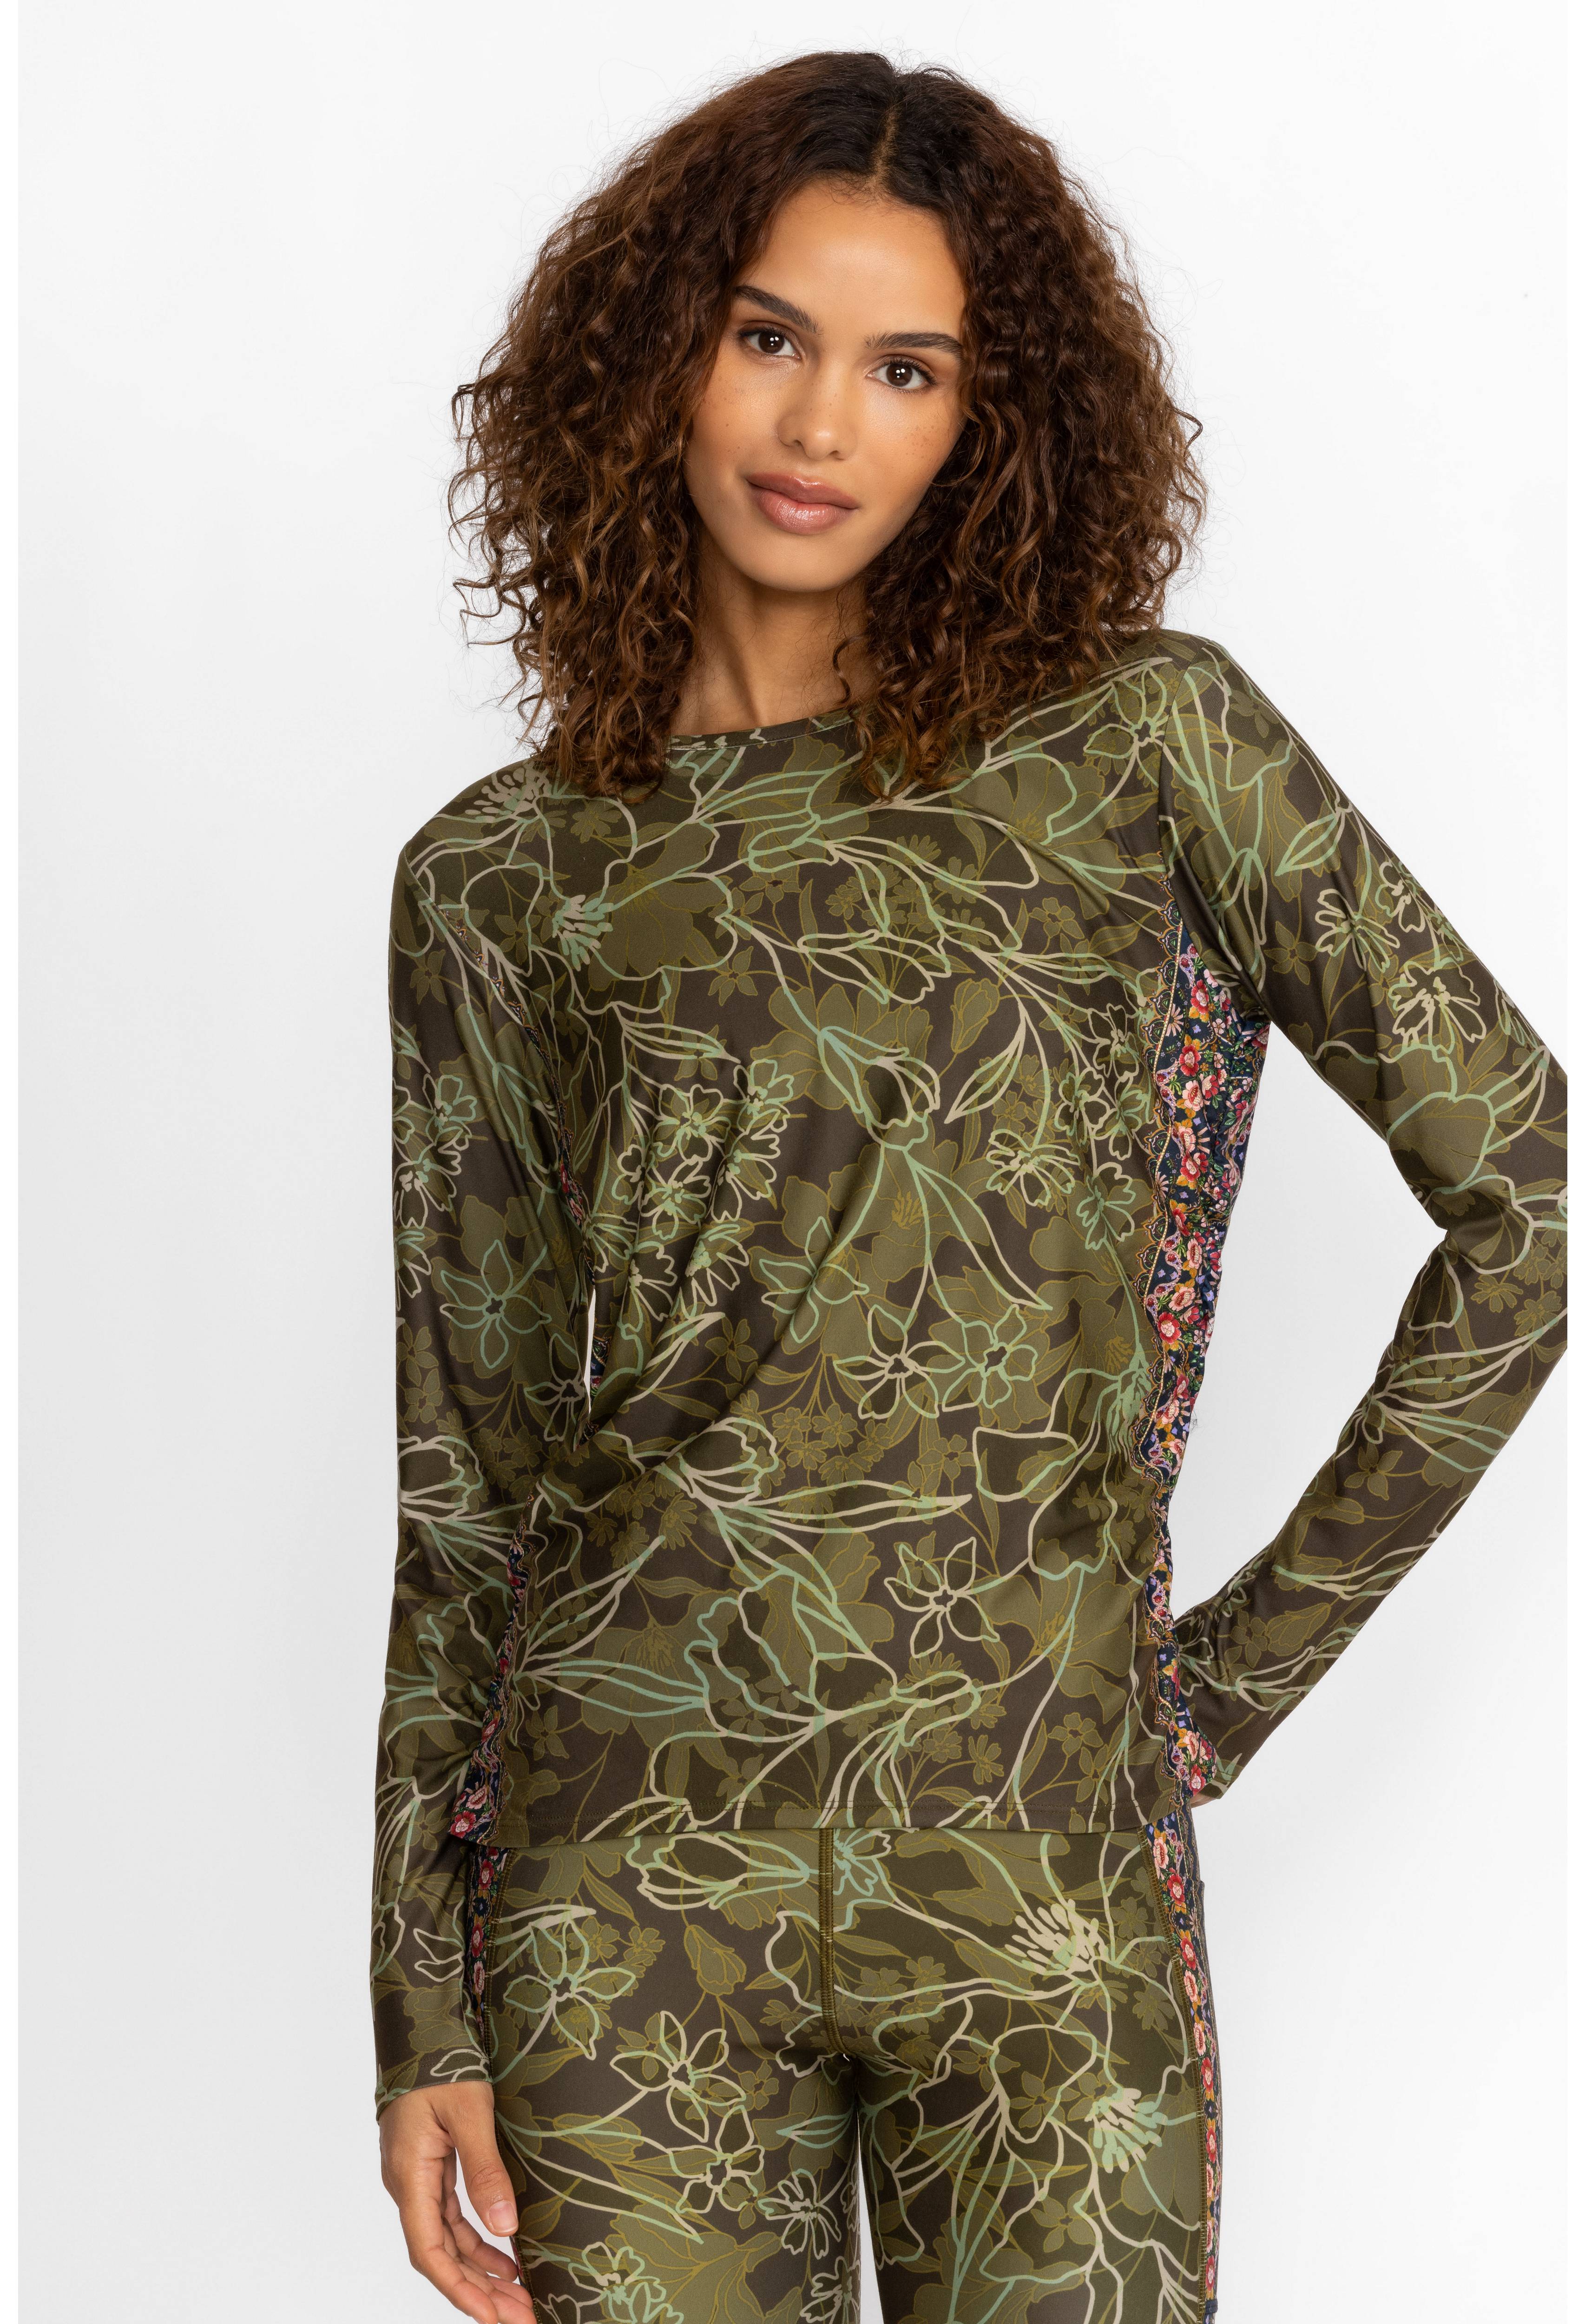 HIRZ CAMO RUCHED LONG SLEEVE TOP, , large image number 3